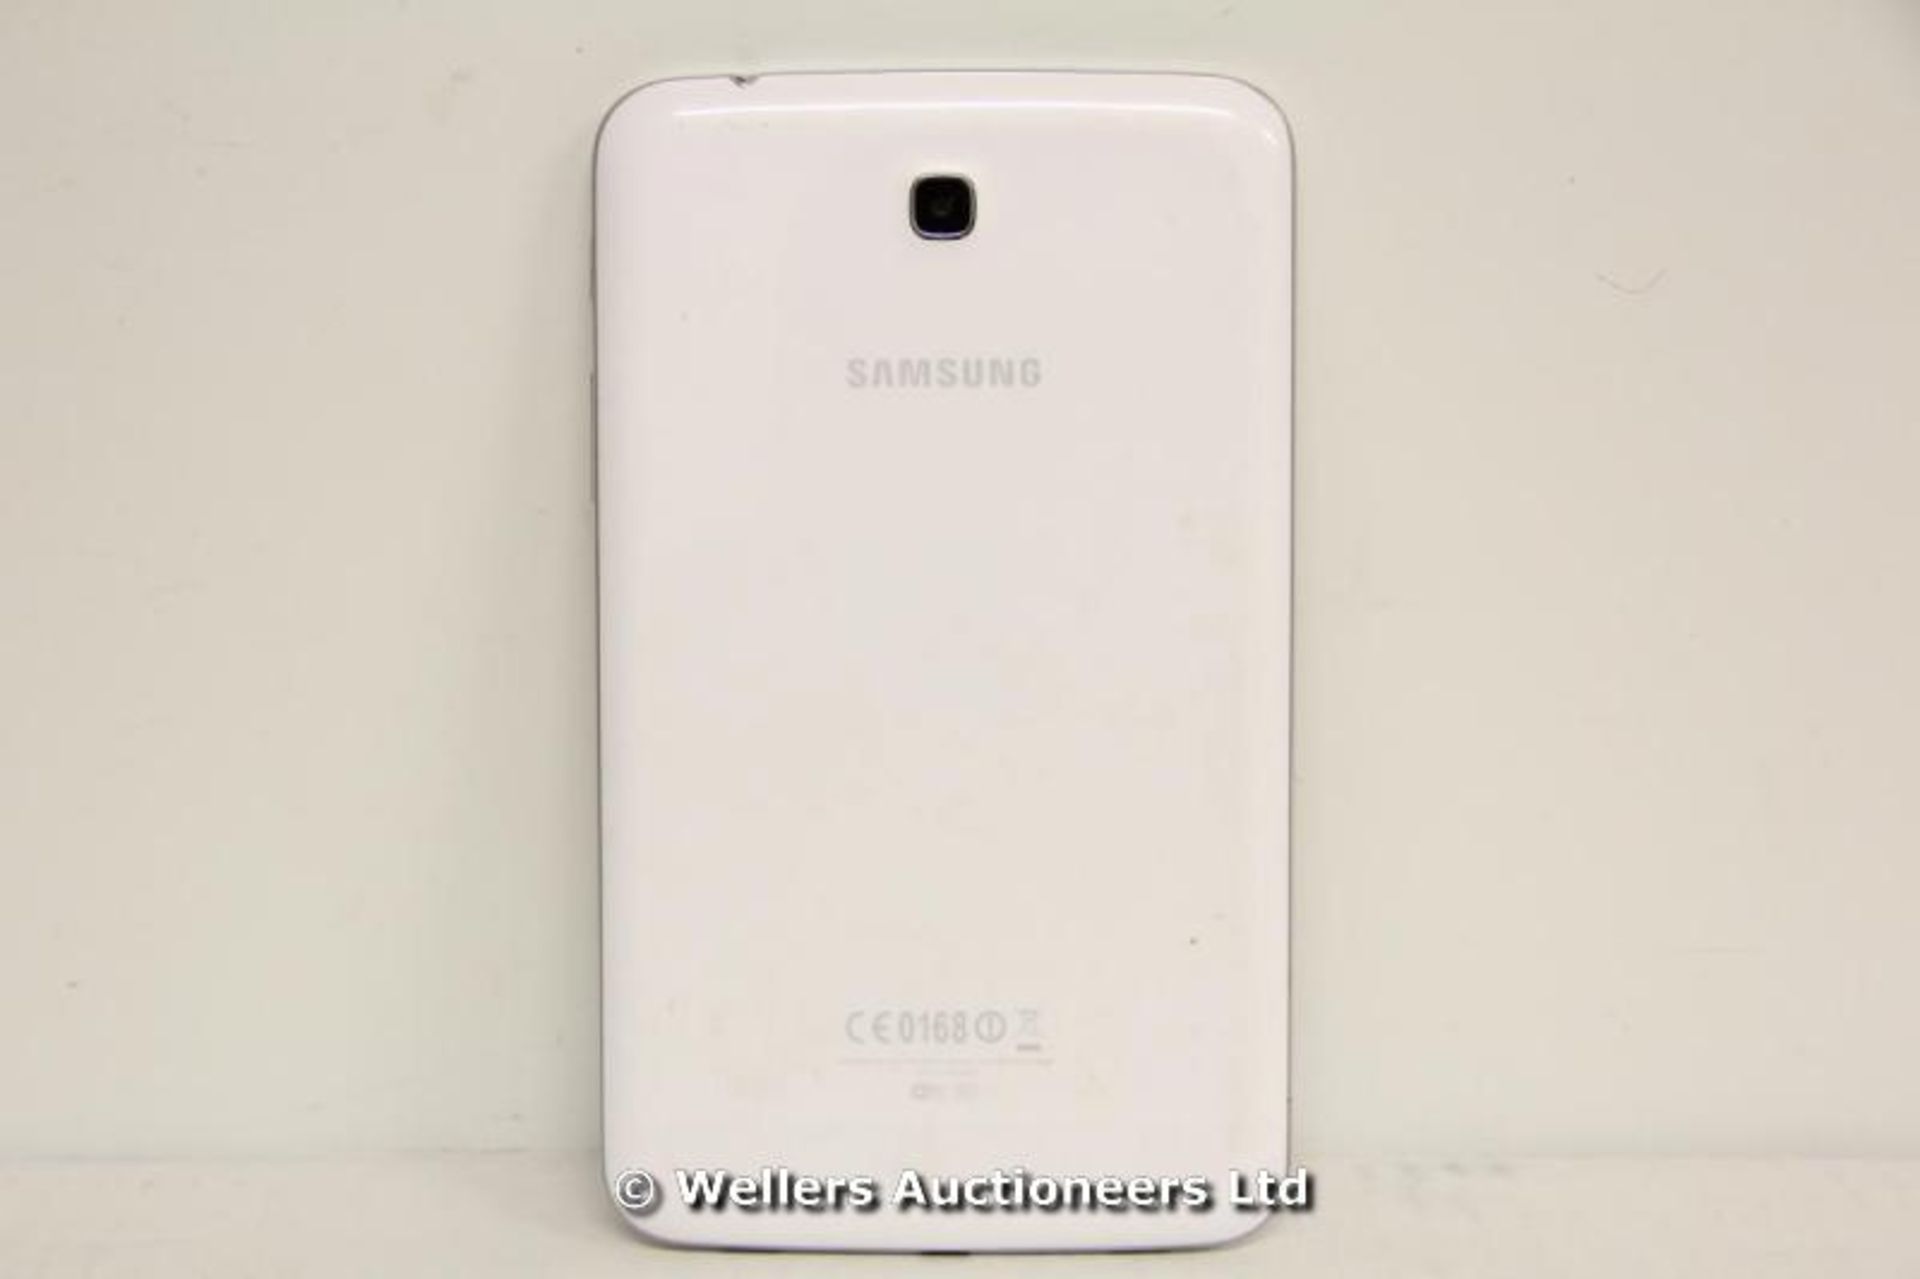 *"SAMSUNG TAB 3 7" TABLET / 1.2GHZ DUAL CORE PROCESSOR / RAM 1GB / 8GB HDD / ANDROID O/S / WITH - Image 2 of 3